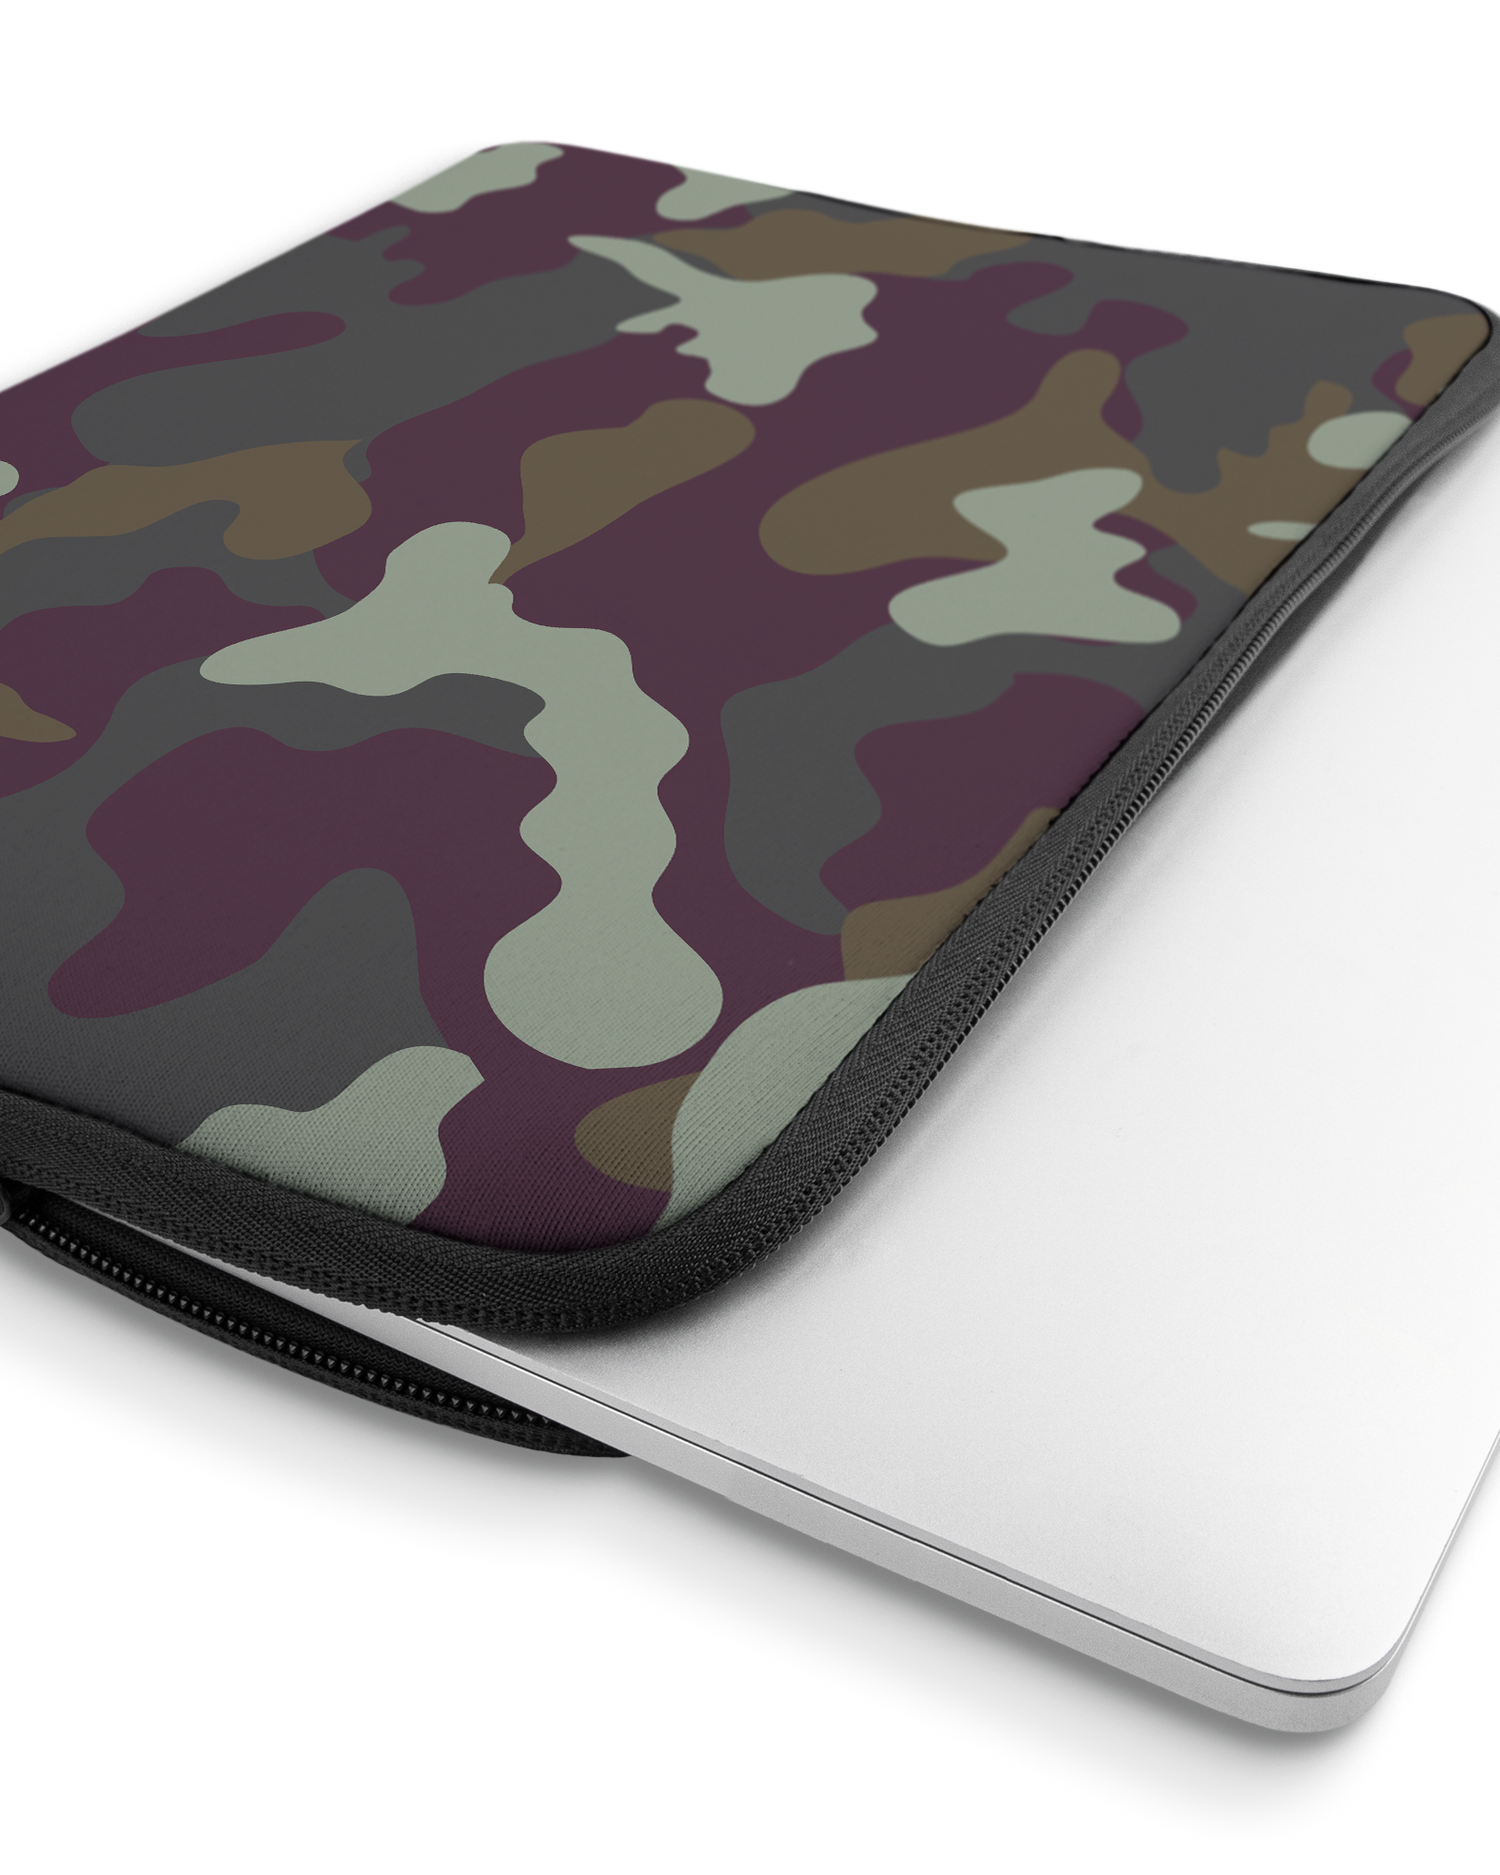 Night Camo Laptop Case 16 inch with device inside